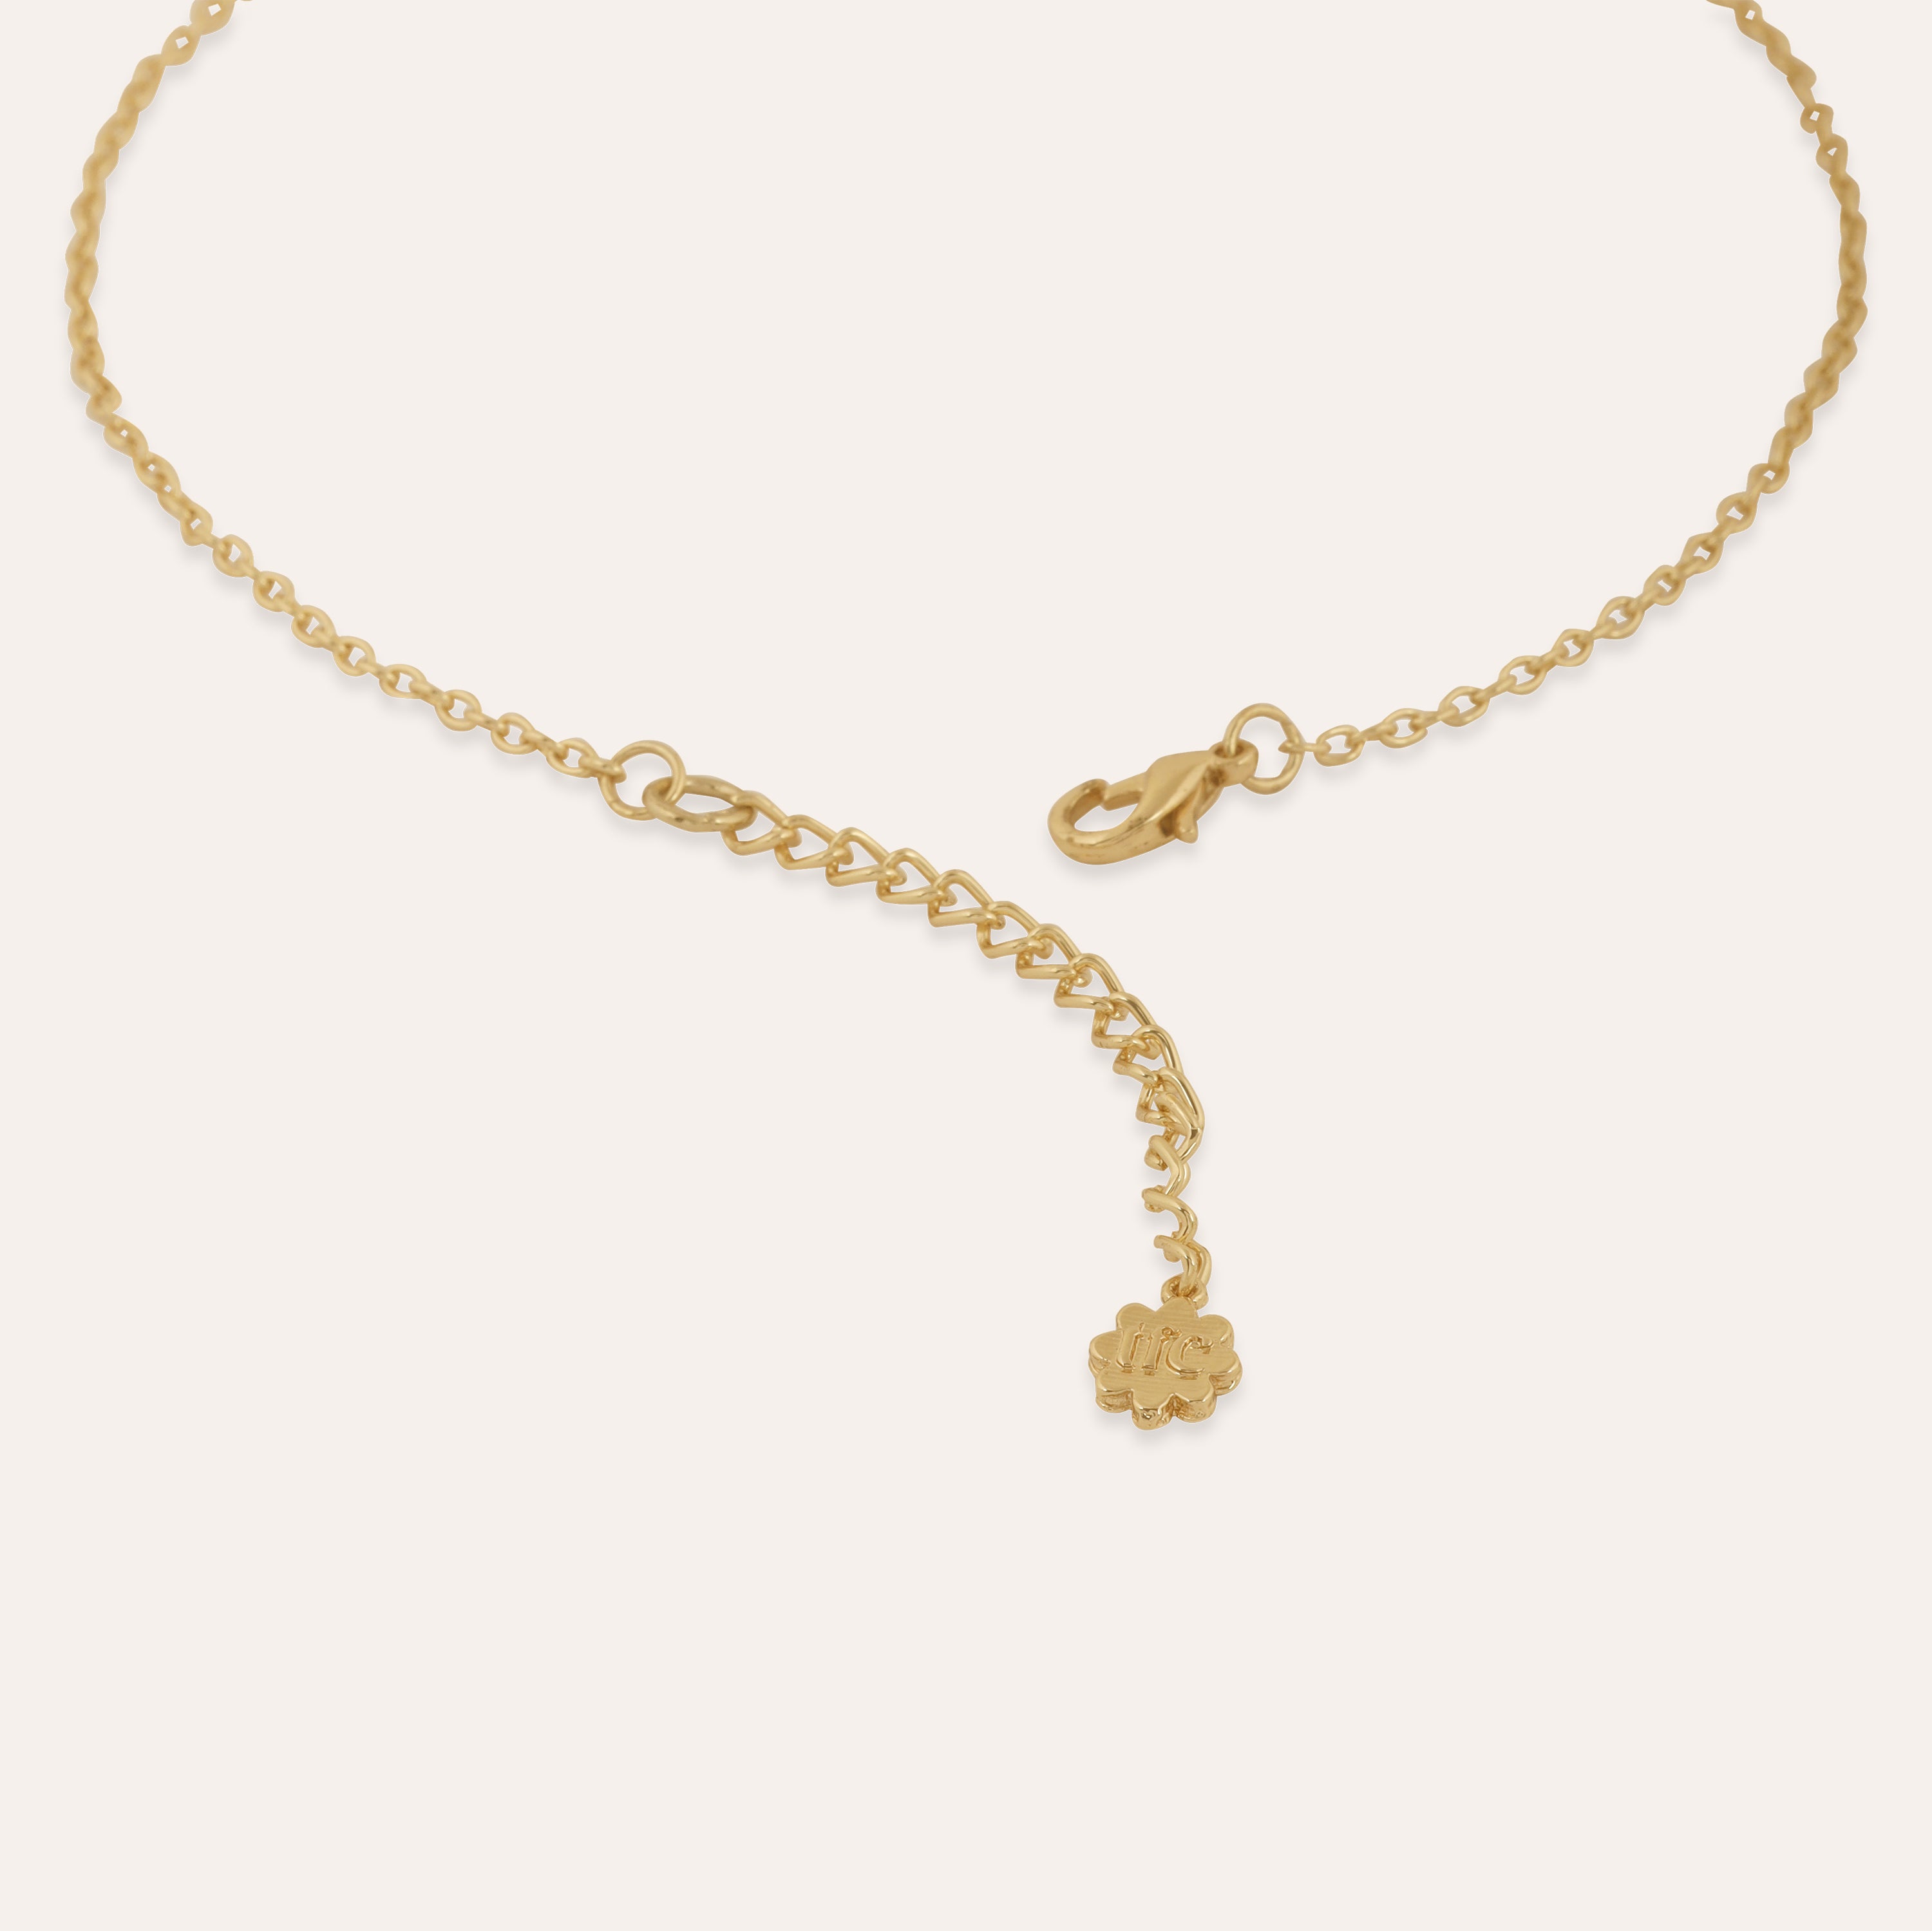 TFC Snake Gold Plated Pendant Necklace-Enhance your elegance with our collection of gold-plated necklaces for women. Choose from stunning pendant necklaces, chic choker necklaces, and trendy layered necklaces. Our sleek and dainty designs are both affordable and anti-tarnish, ensuring lasting beauty. Enjoy the cheapest fashion jewellery, lightweight and stylish- only at The Fun Company.